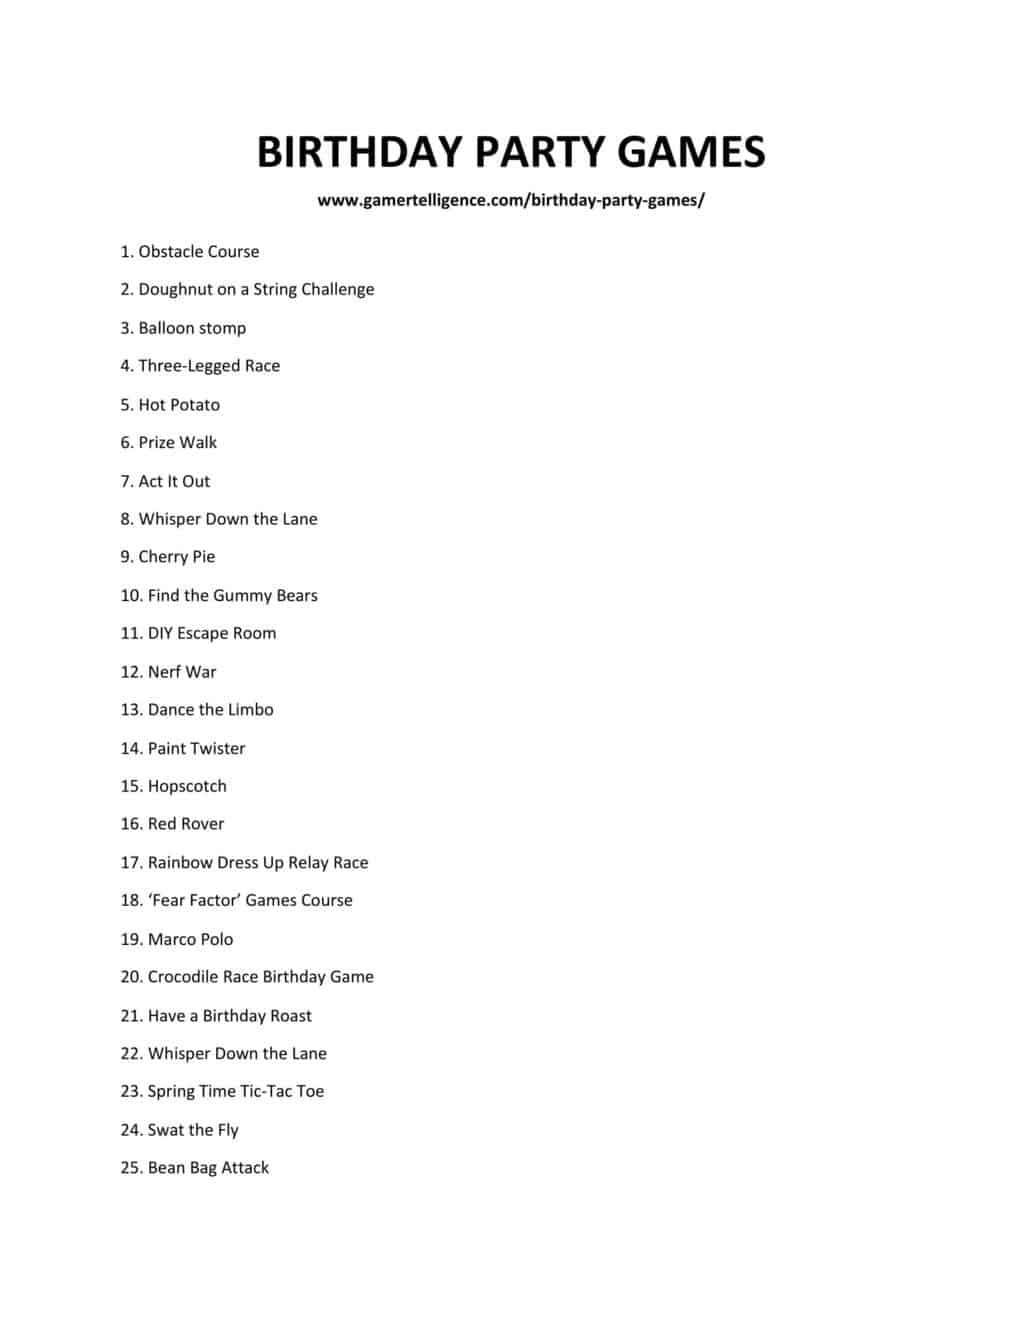 a downloadable list of party games for birthdays